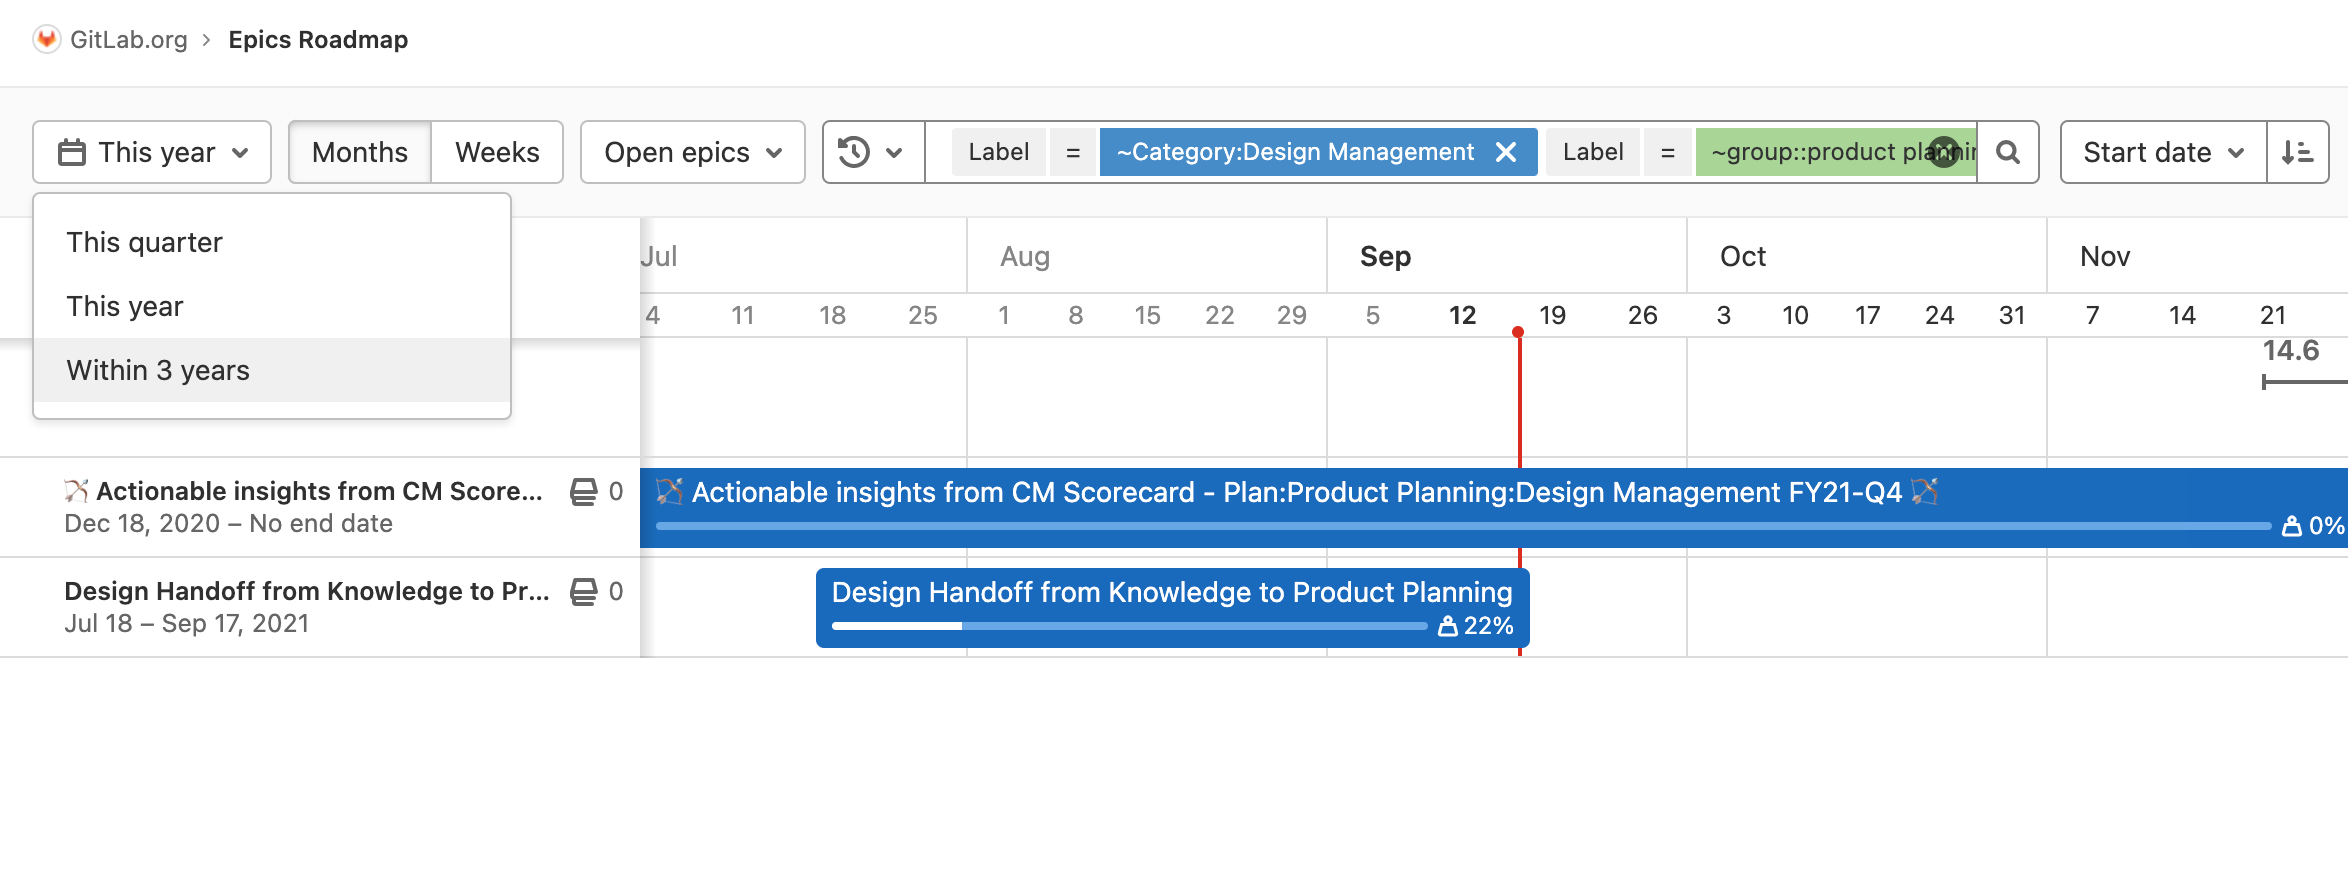 Filter roadmap view by set dates